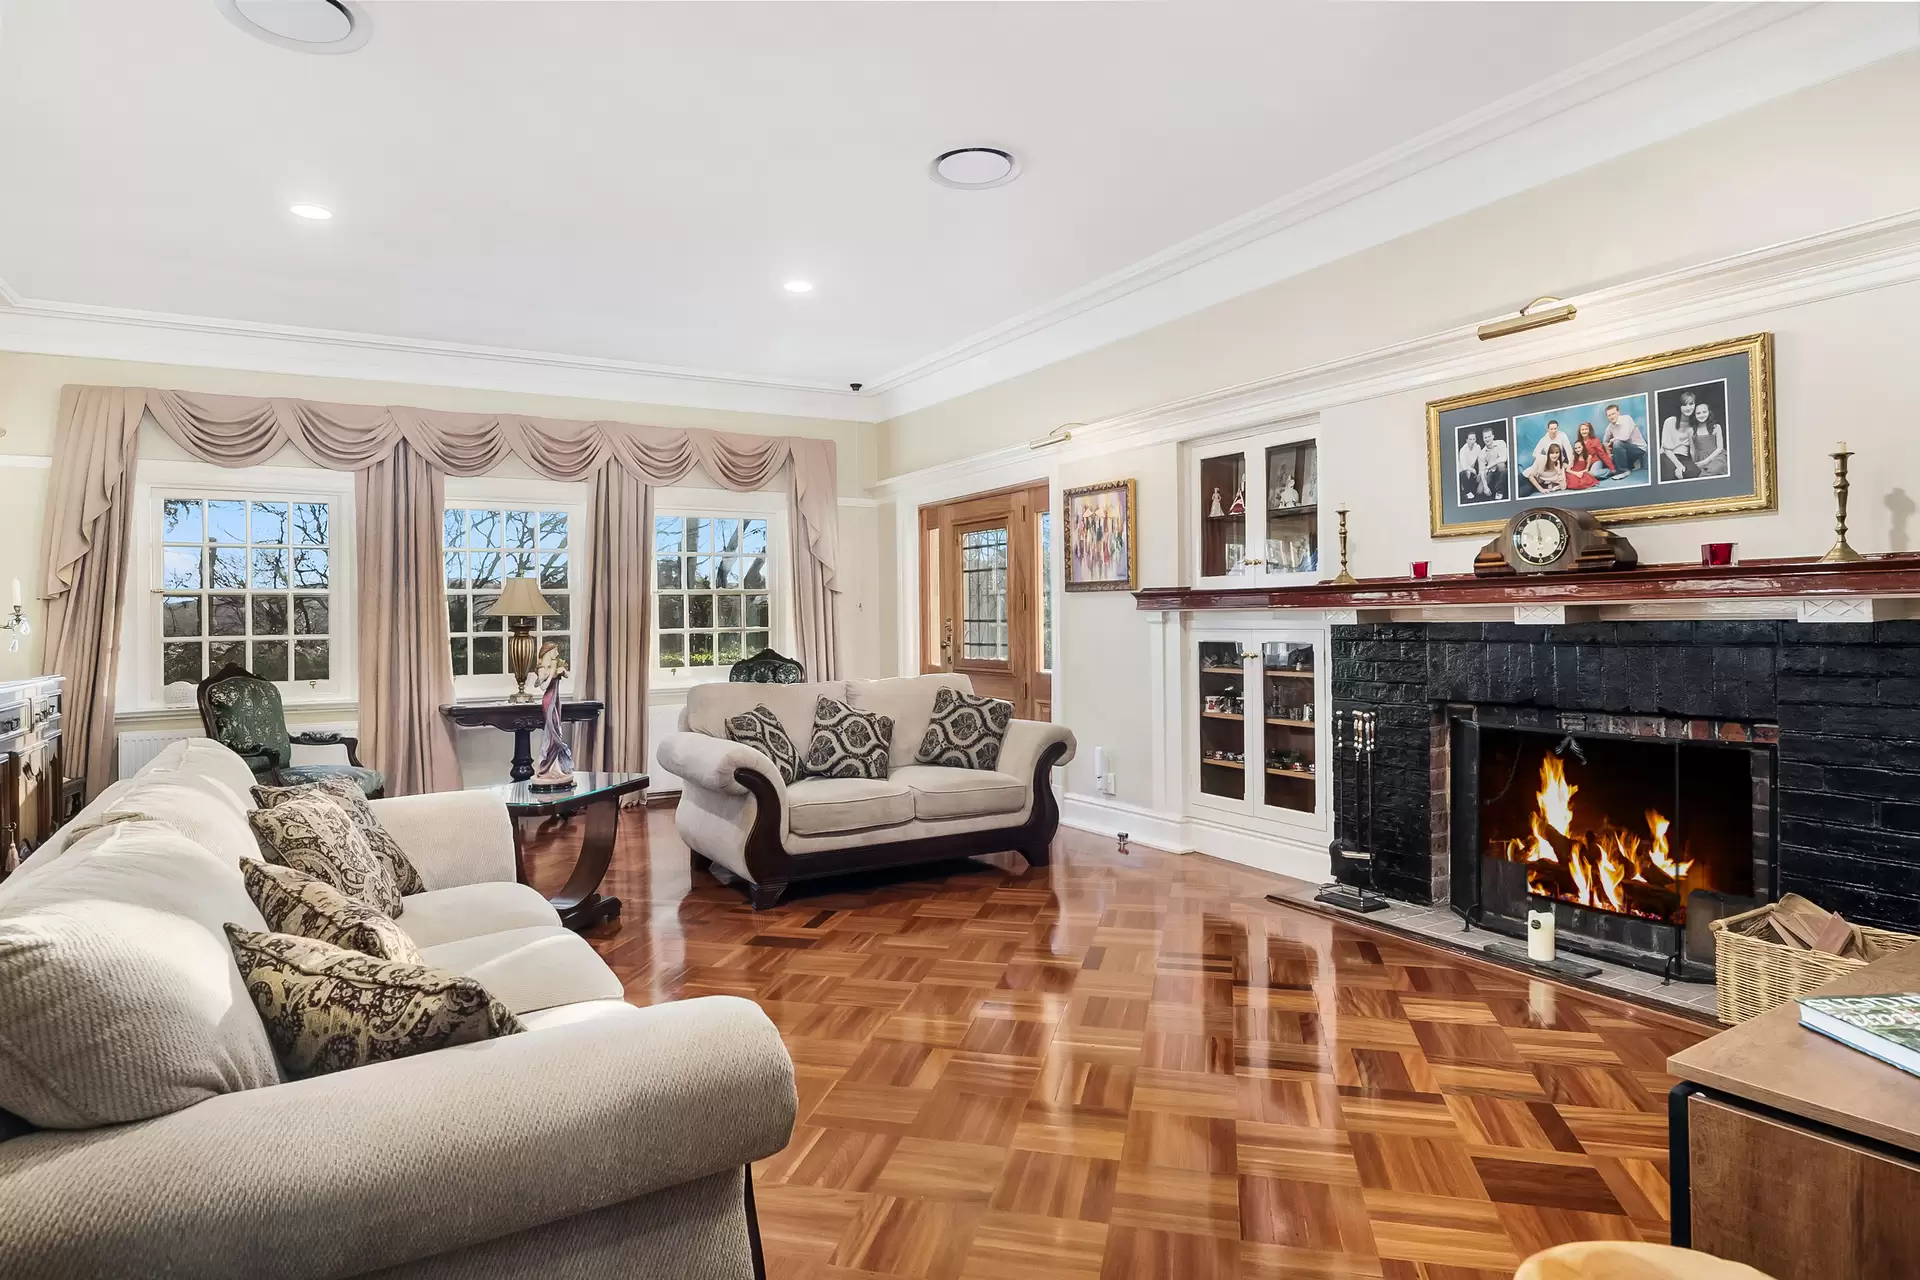 Photo #4: 24 Queen Street, Bowral - For Sale by Drew Lindsay Sotheby's International Realty